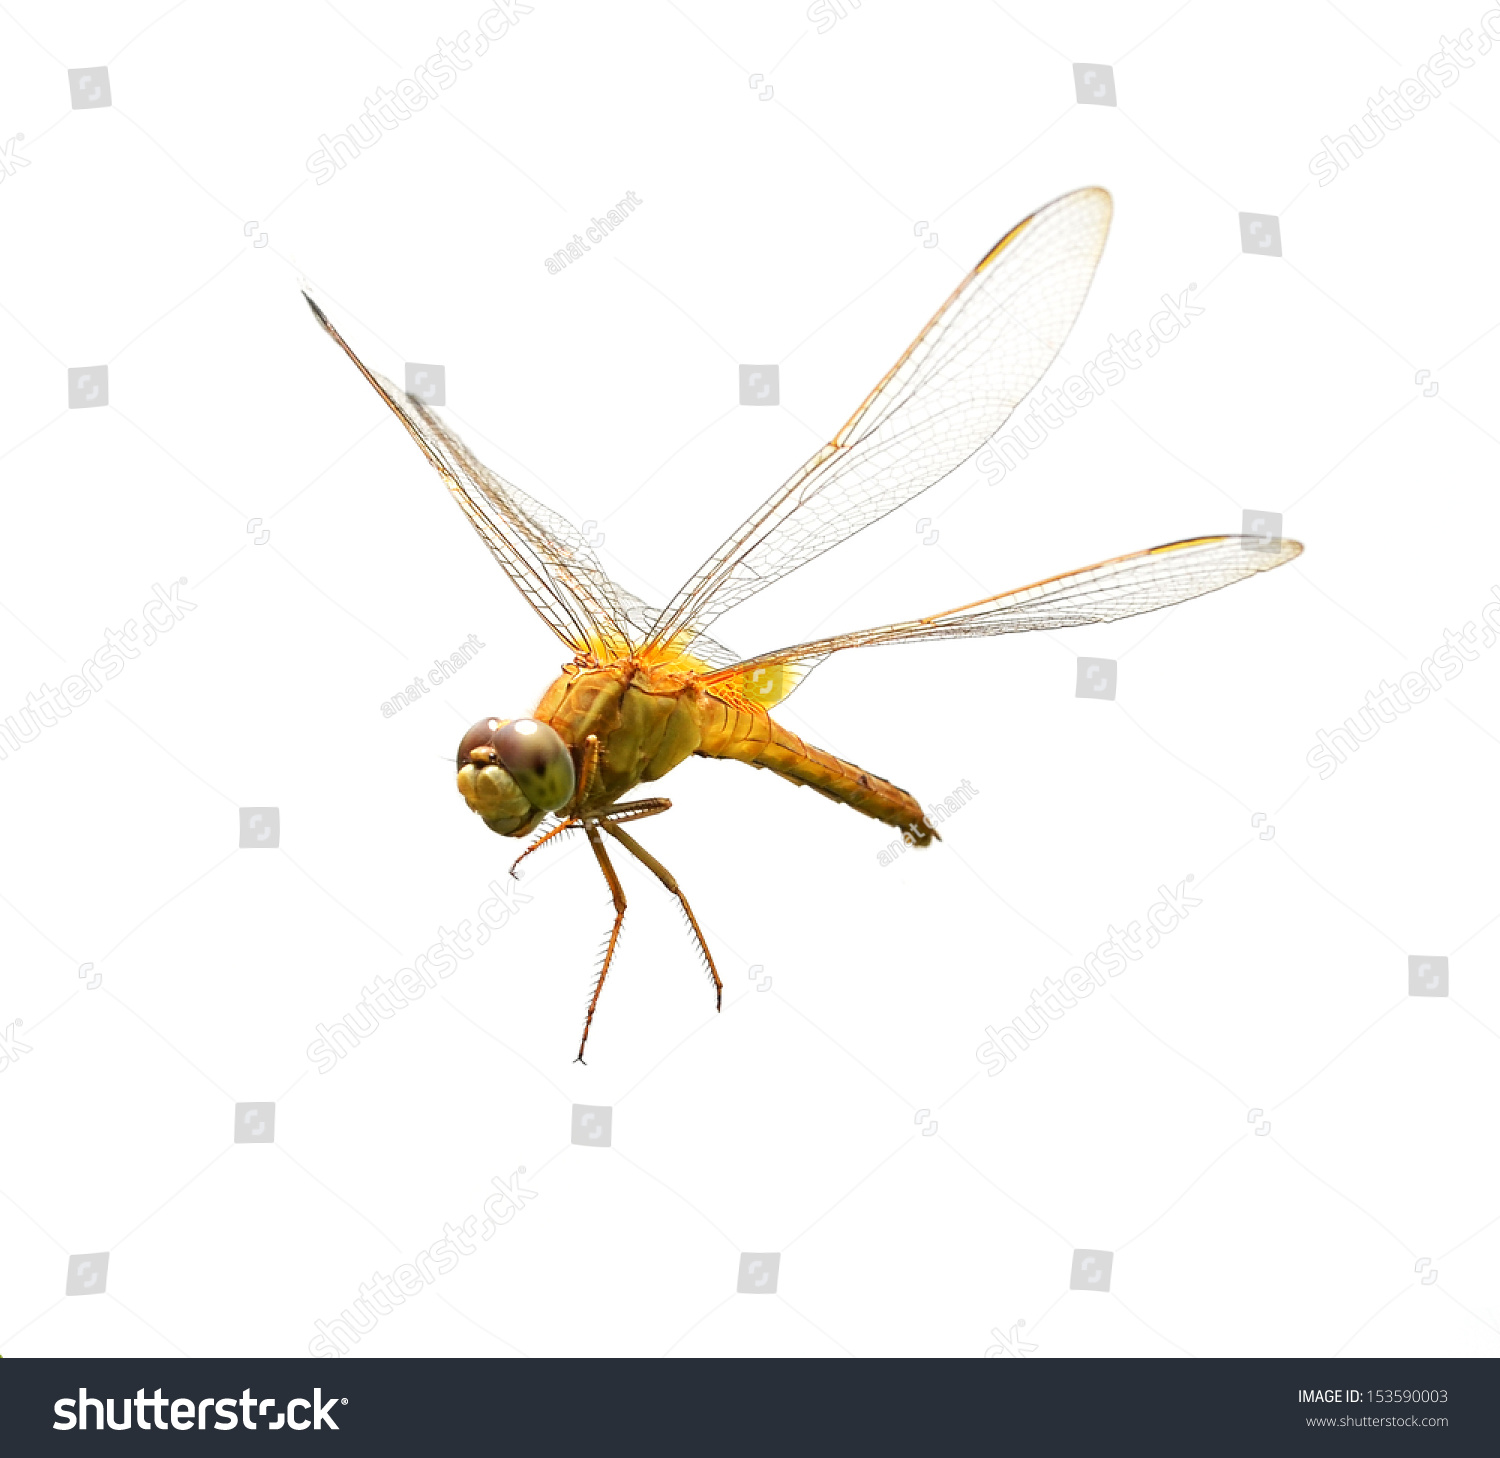 Dragonfly On A White Background Stock Photo 153590003 : Shutterstock